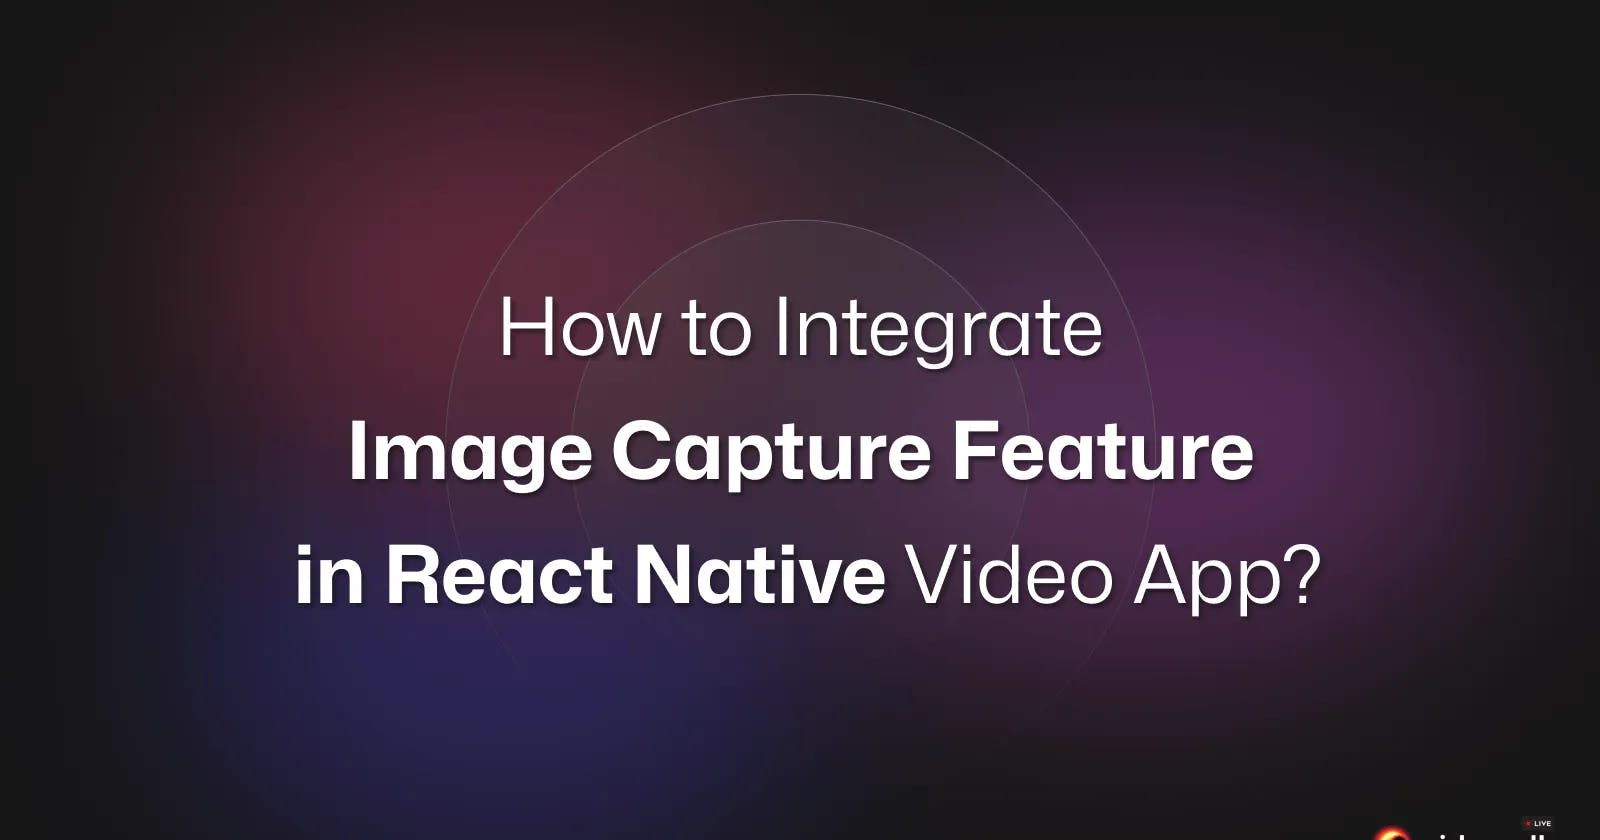 How to Integrate Image Capture Feature in React Native Video Calling App?